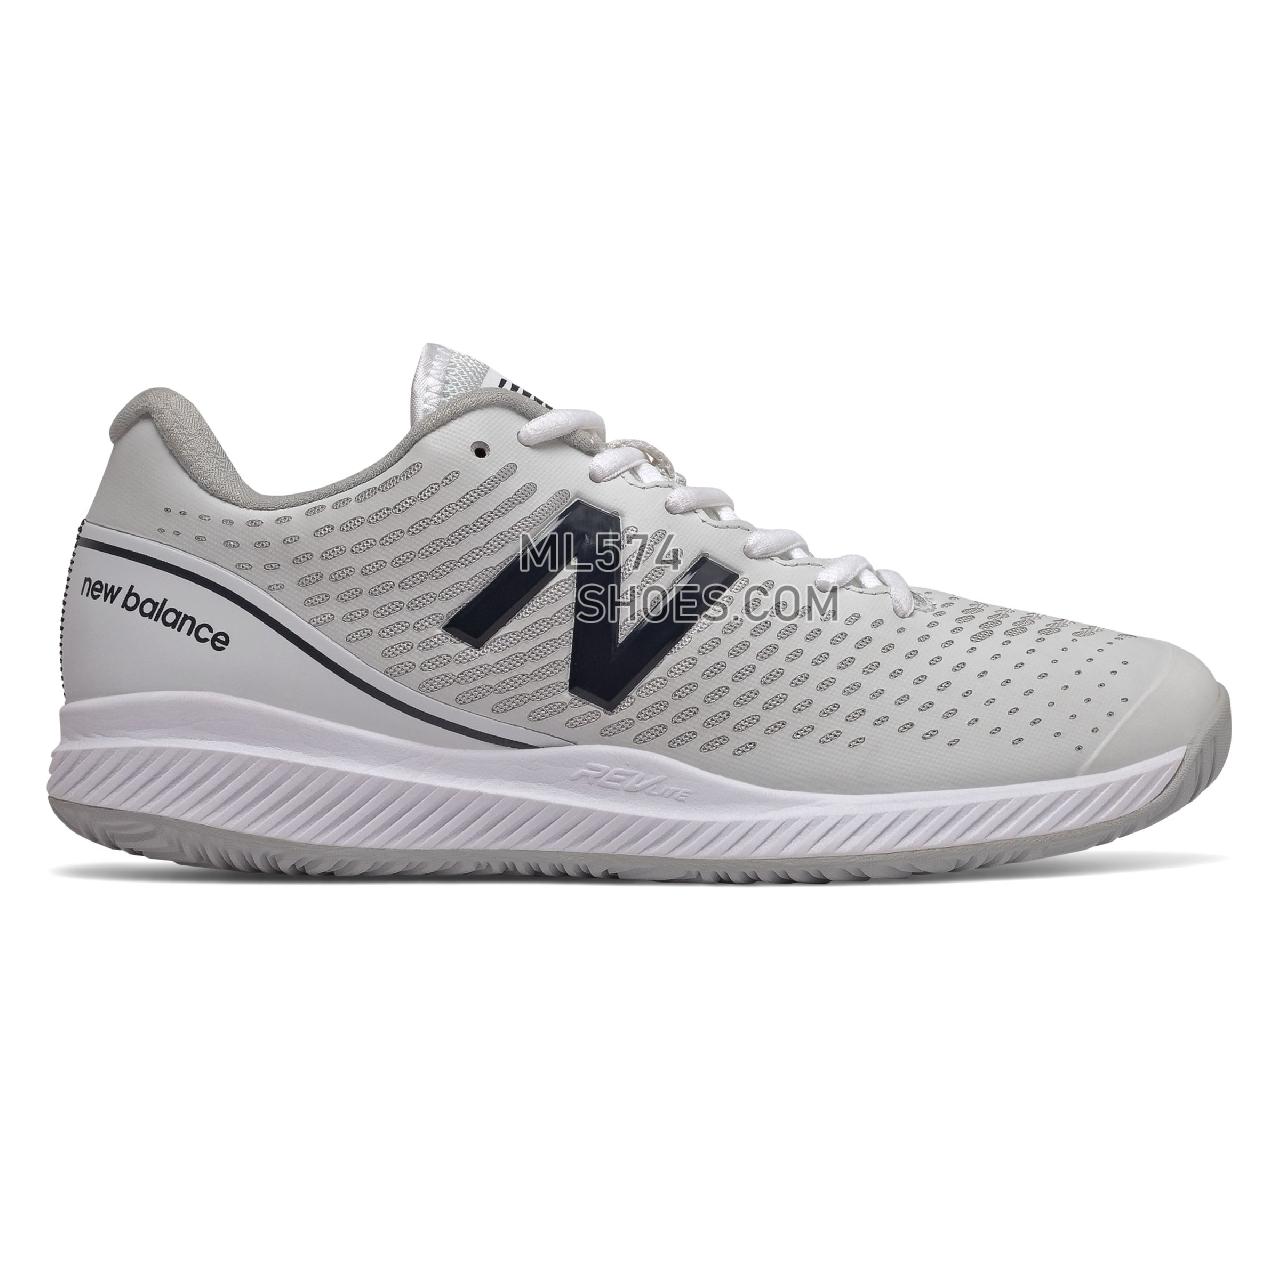 New Balance 796v2 - Women's Tennis - White with Navy - WCH796N2